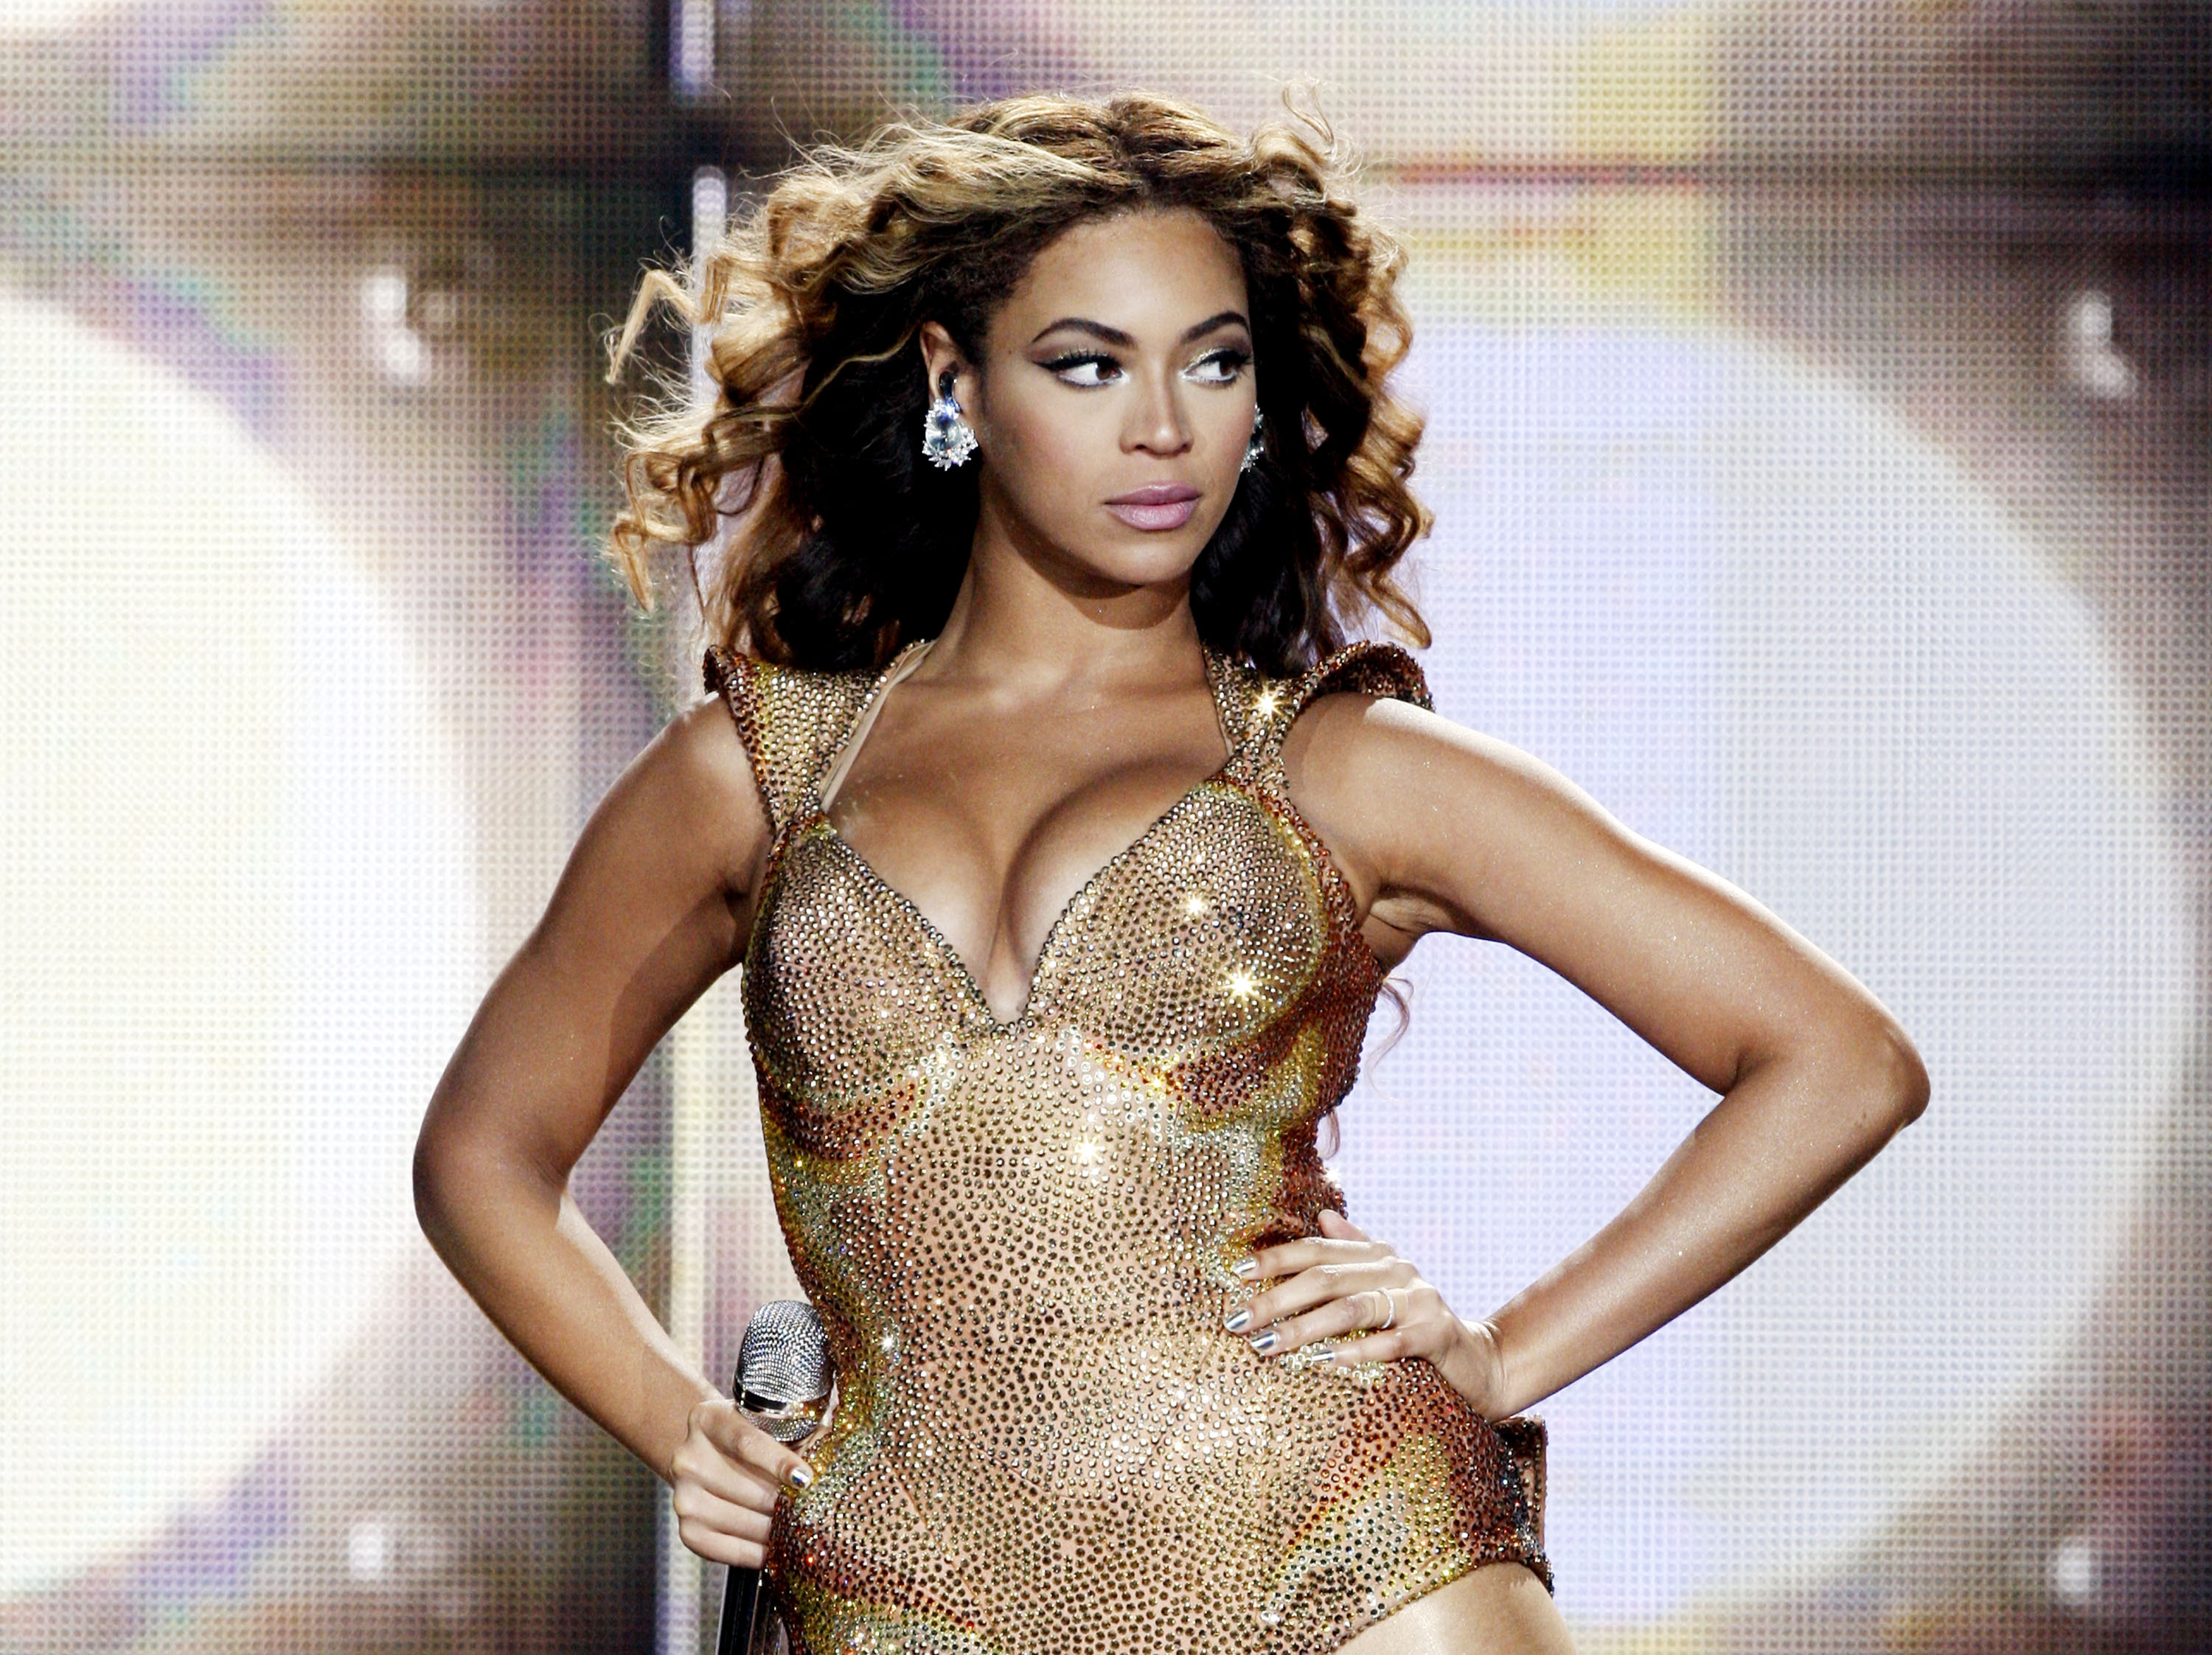 Beyonce performs at the Staples Center on July 13, 2009 in Los Angeles, California. (Kevin Winter—Getty Images)